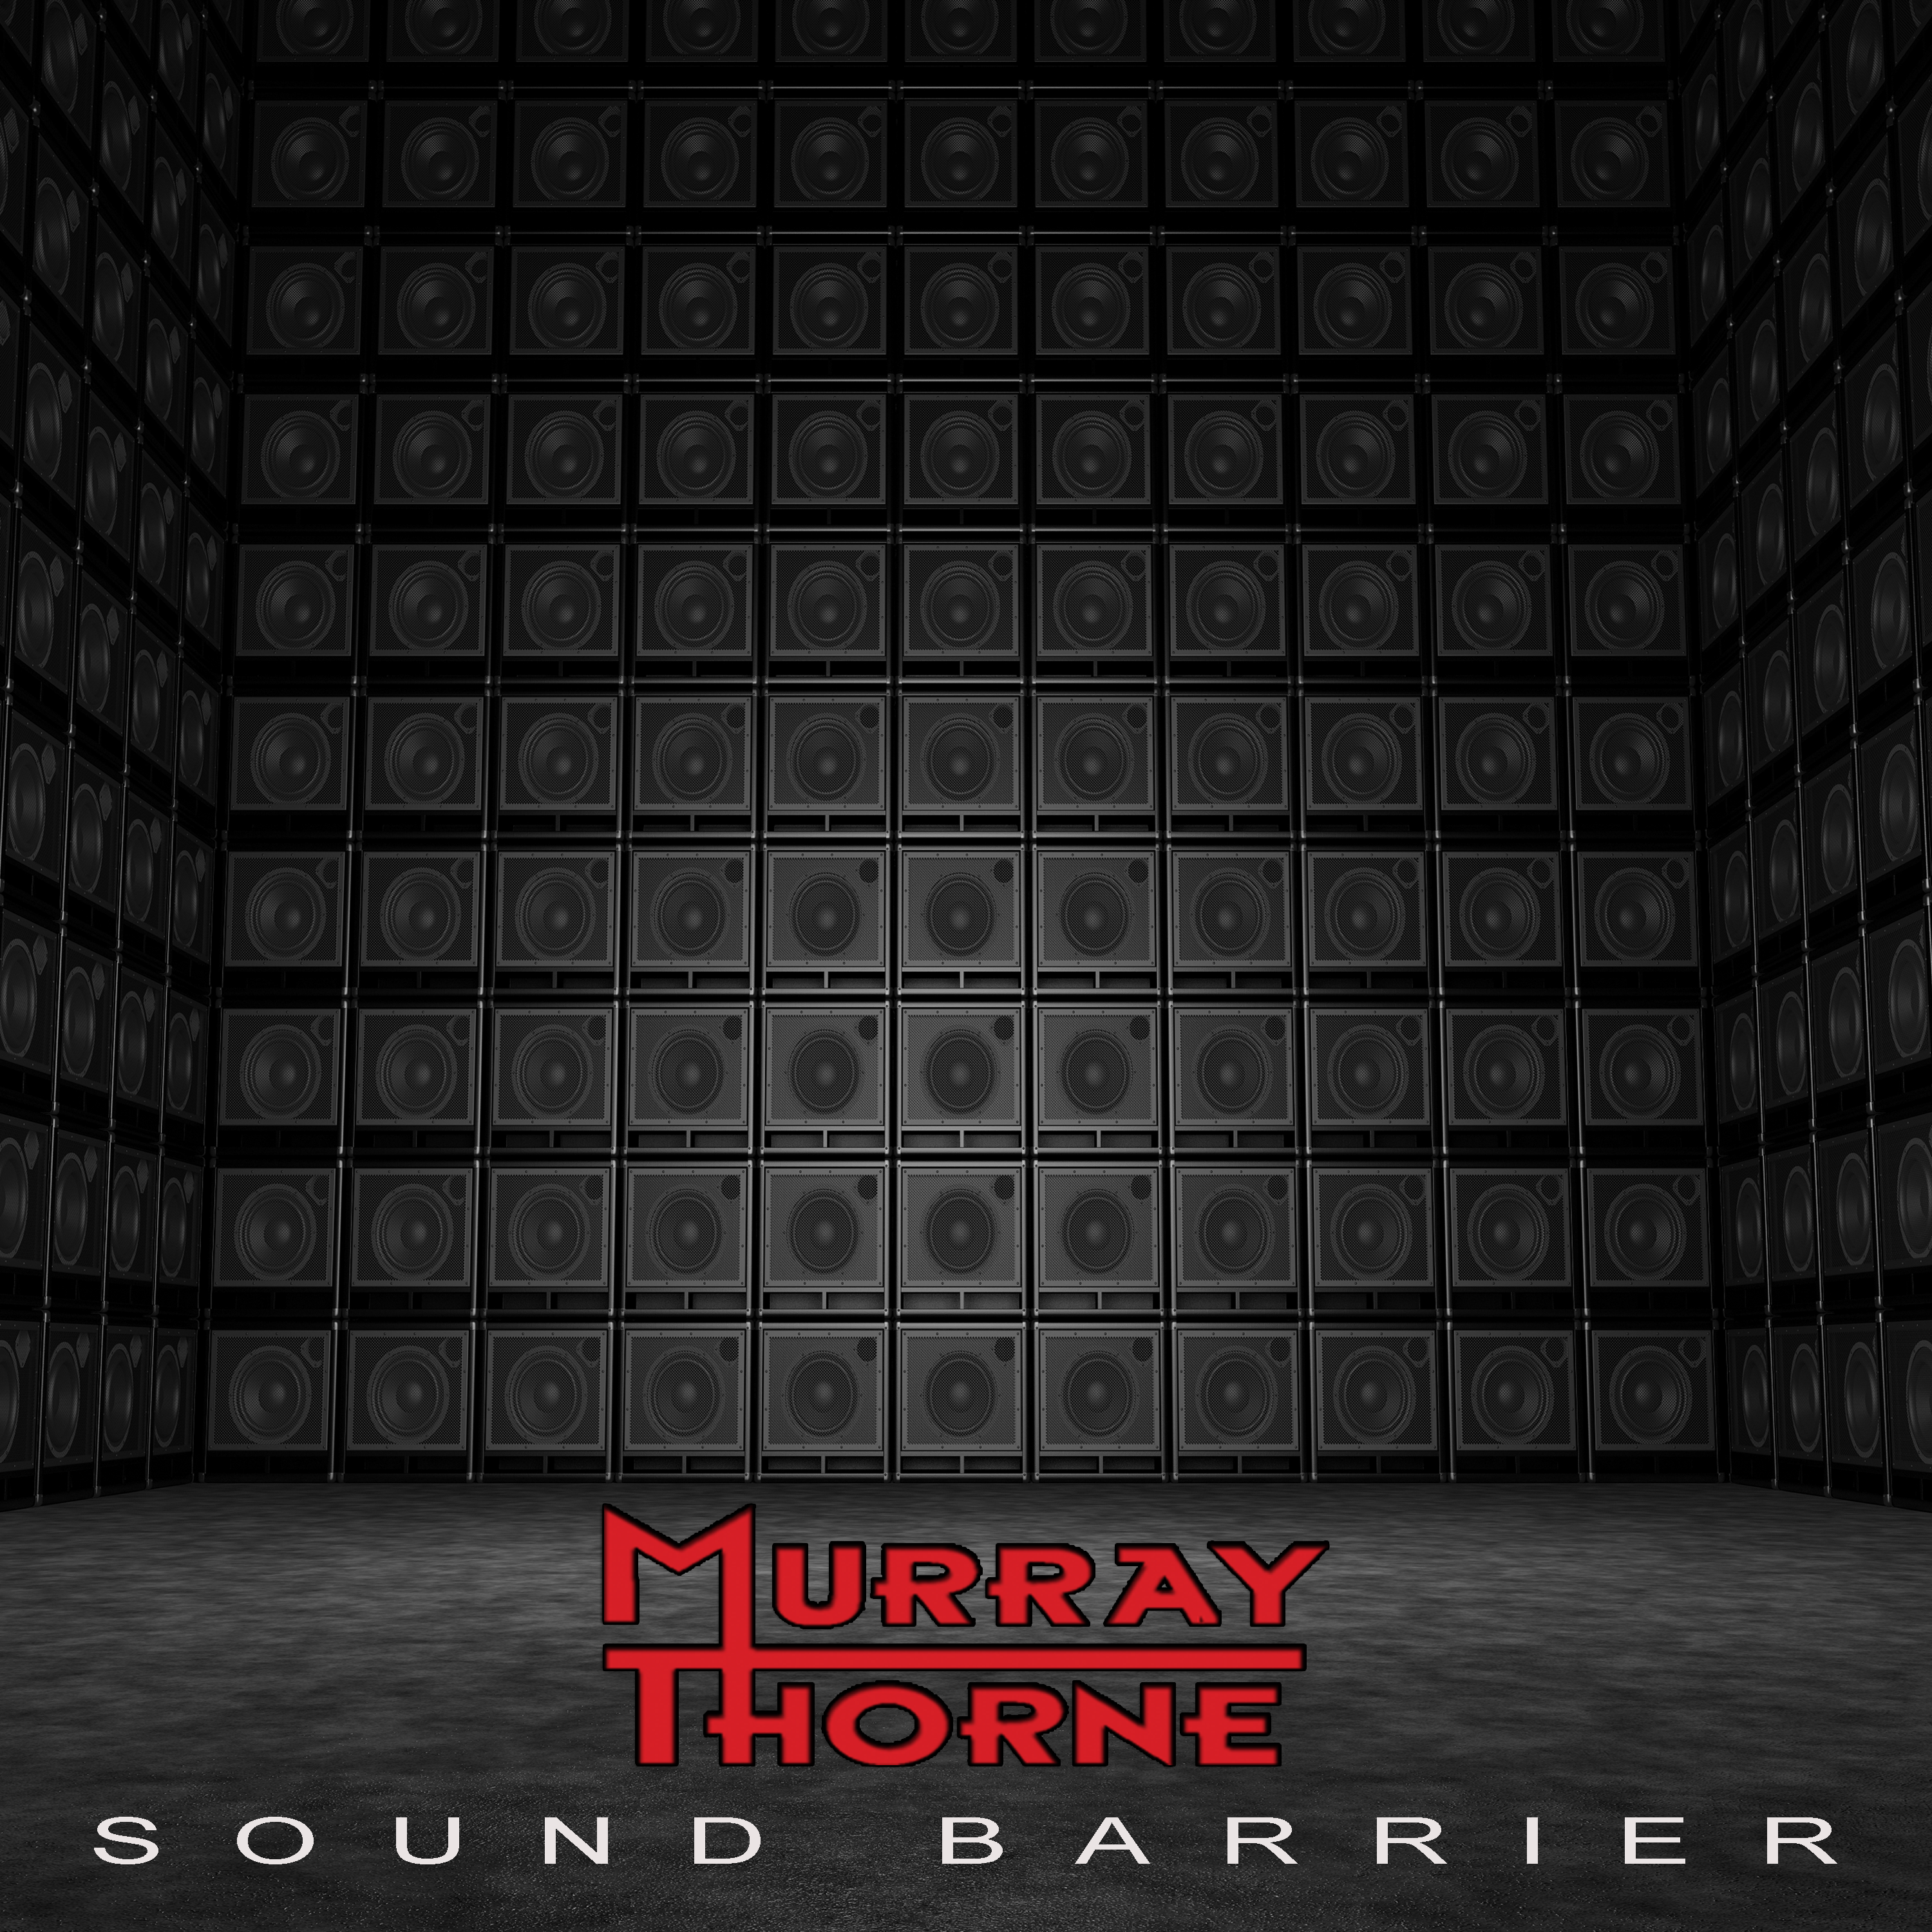 MURRAY THORNE-SOUND BARRIER COVER